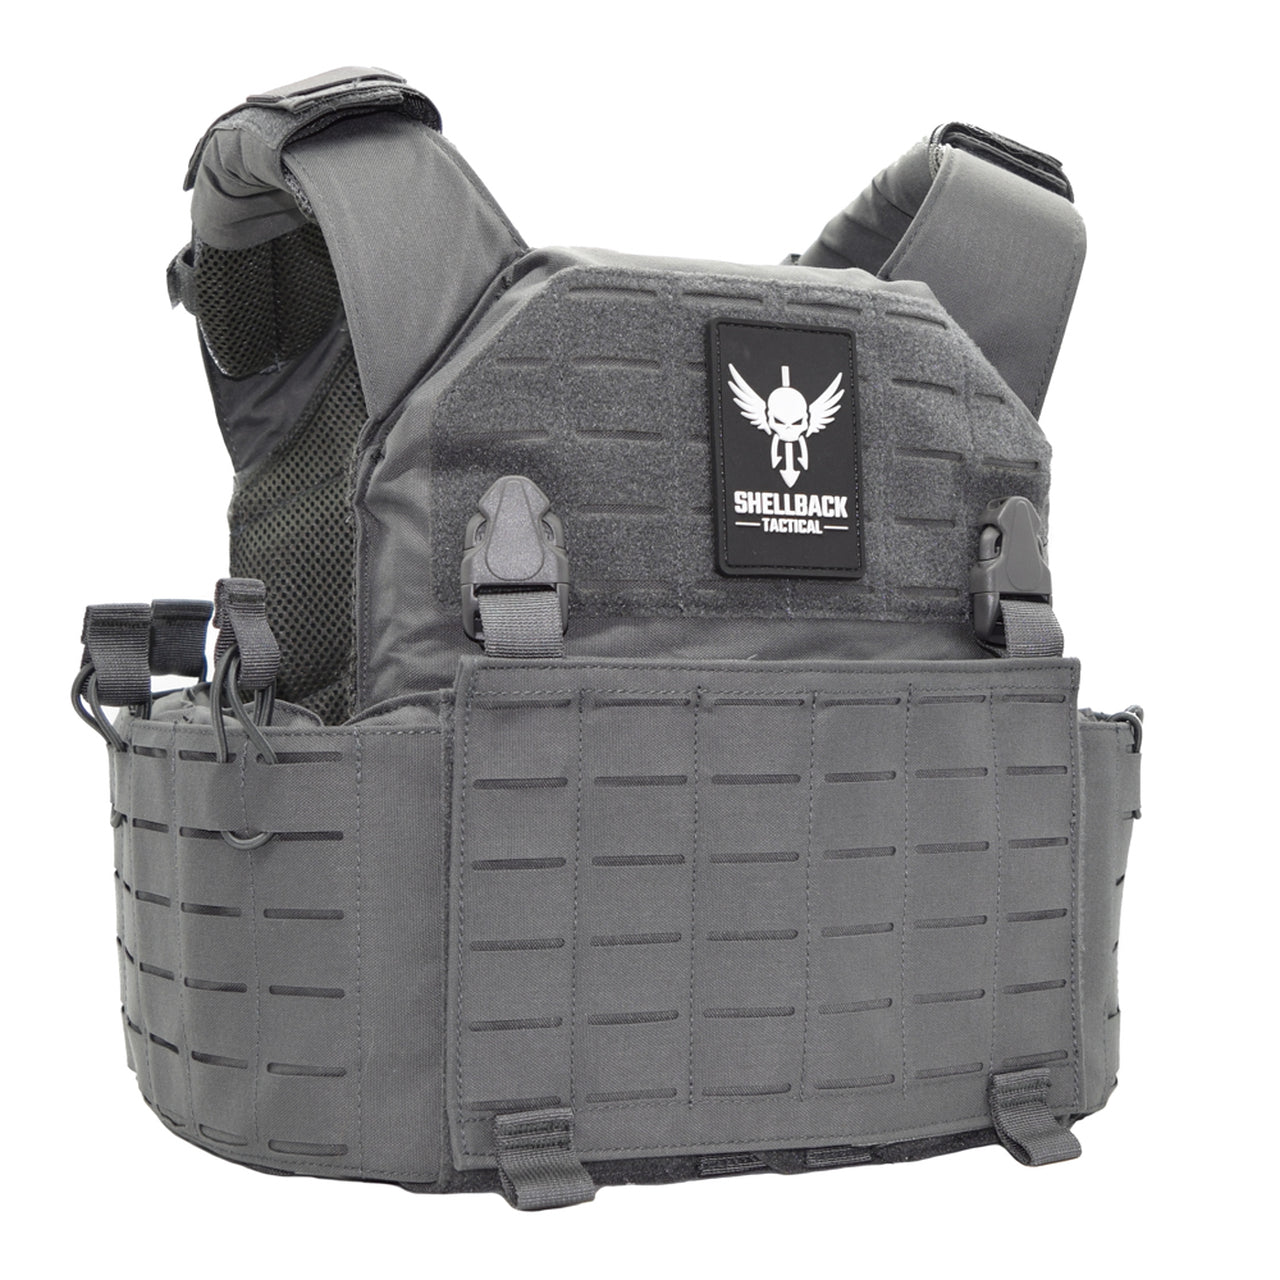 Shellback Tactical Rampage 2.0 Plate Carrier – Pivotal Body Armor